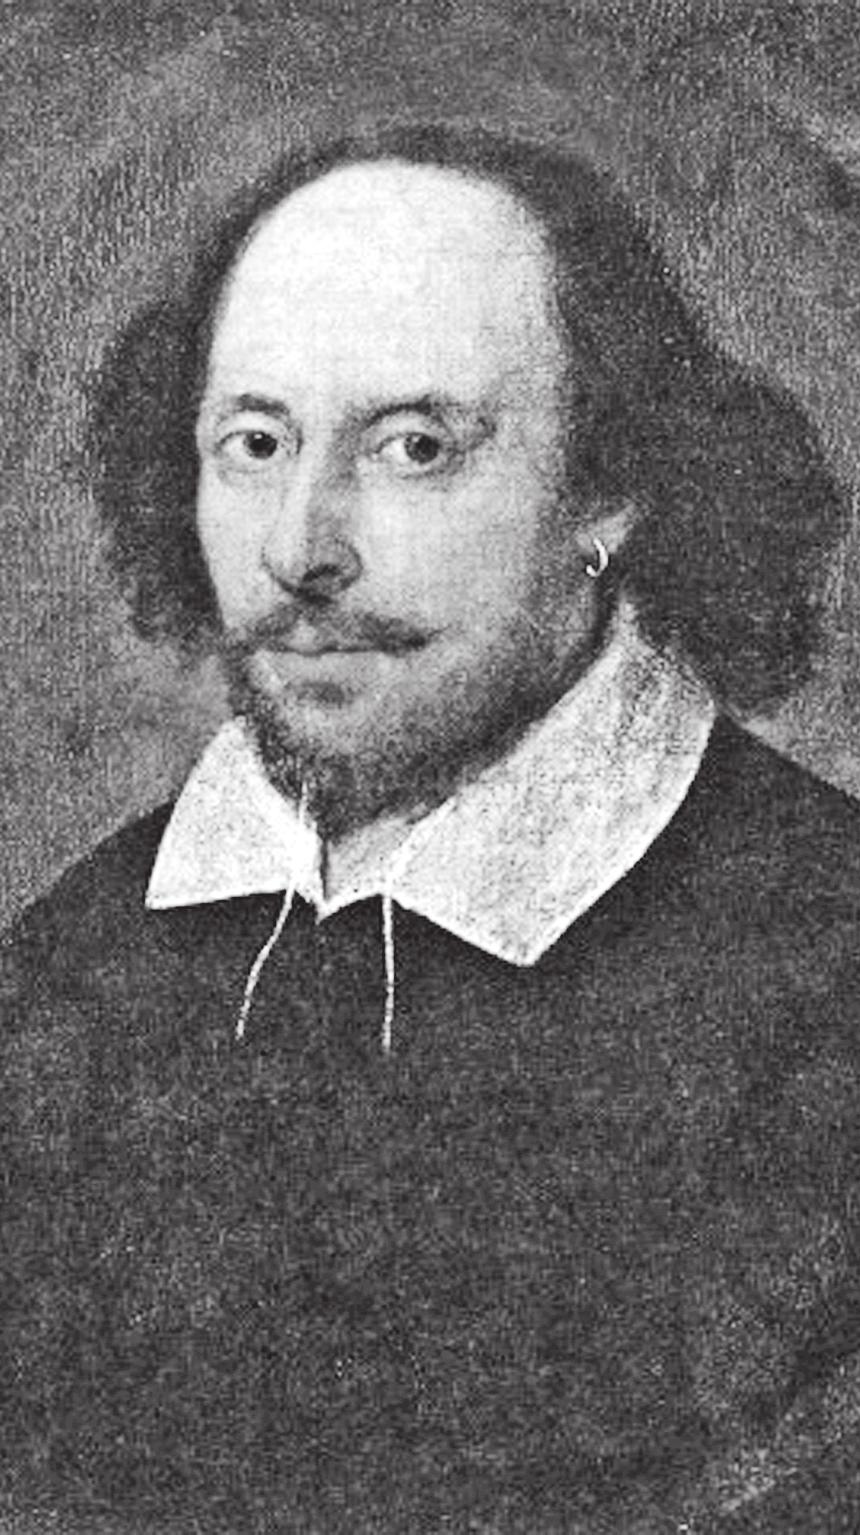 details of other people s lives. In his time Shakespeare was a famous playwright, but perhaps no more famous than some other London playwrights like Ben Jonson or Christopher Marlowe.